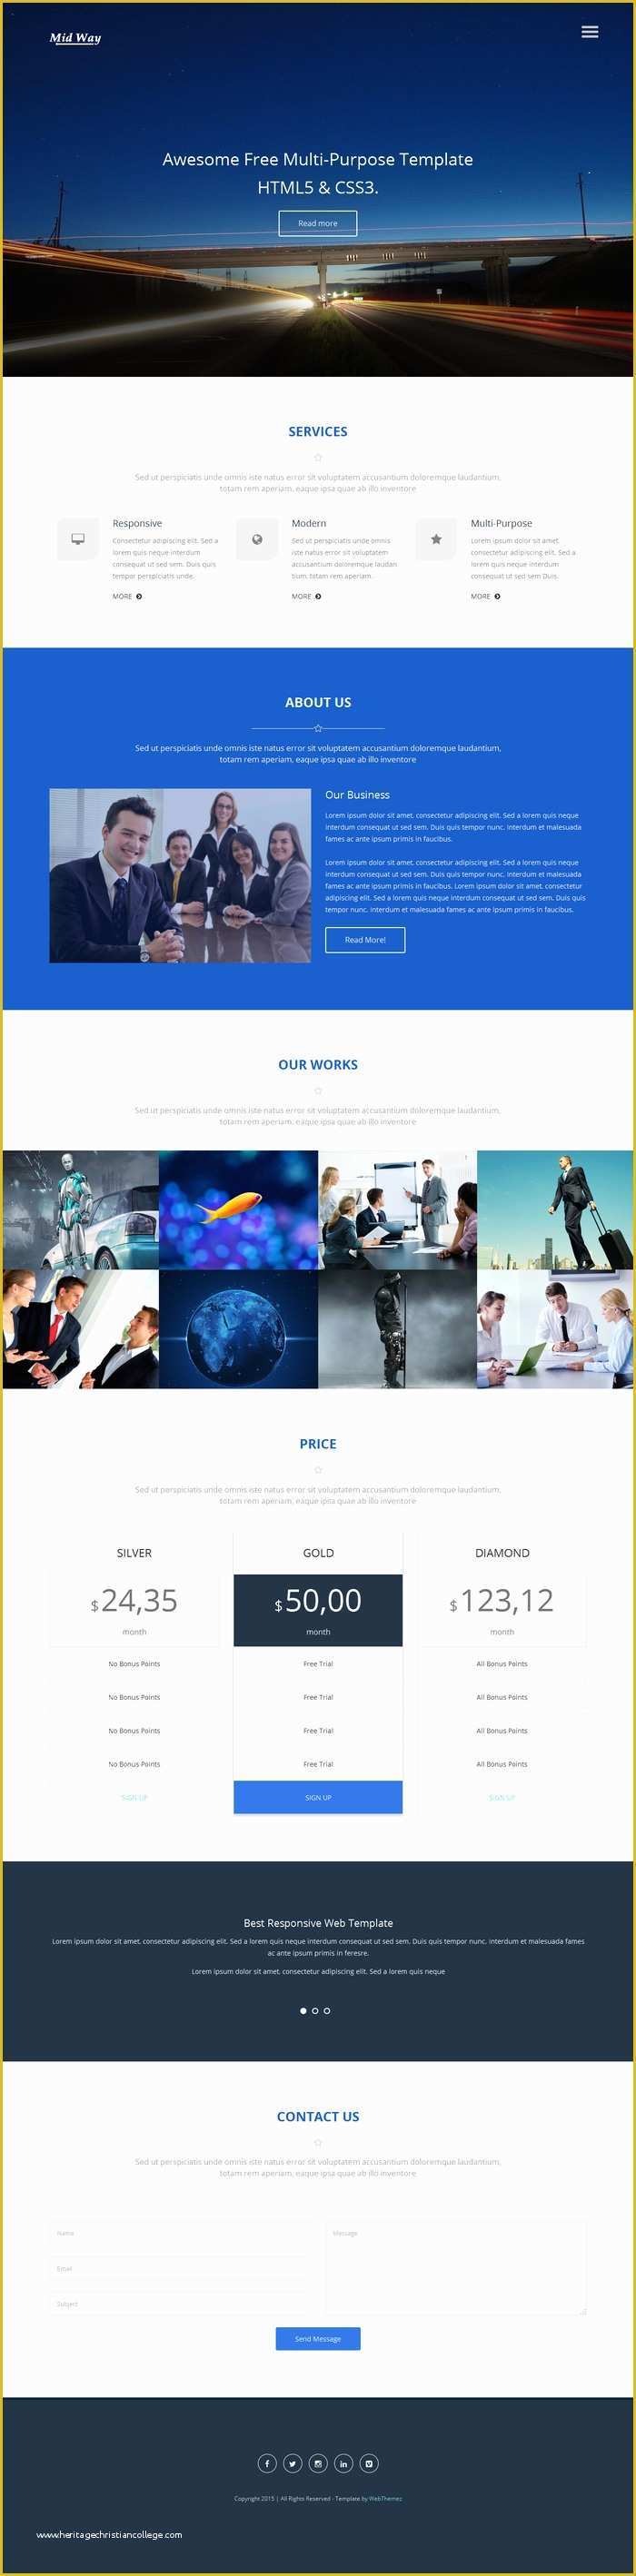 Free Website Templates HTML5 Of 10 Best Free Website HTML5 Templates – February 2015